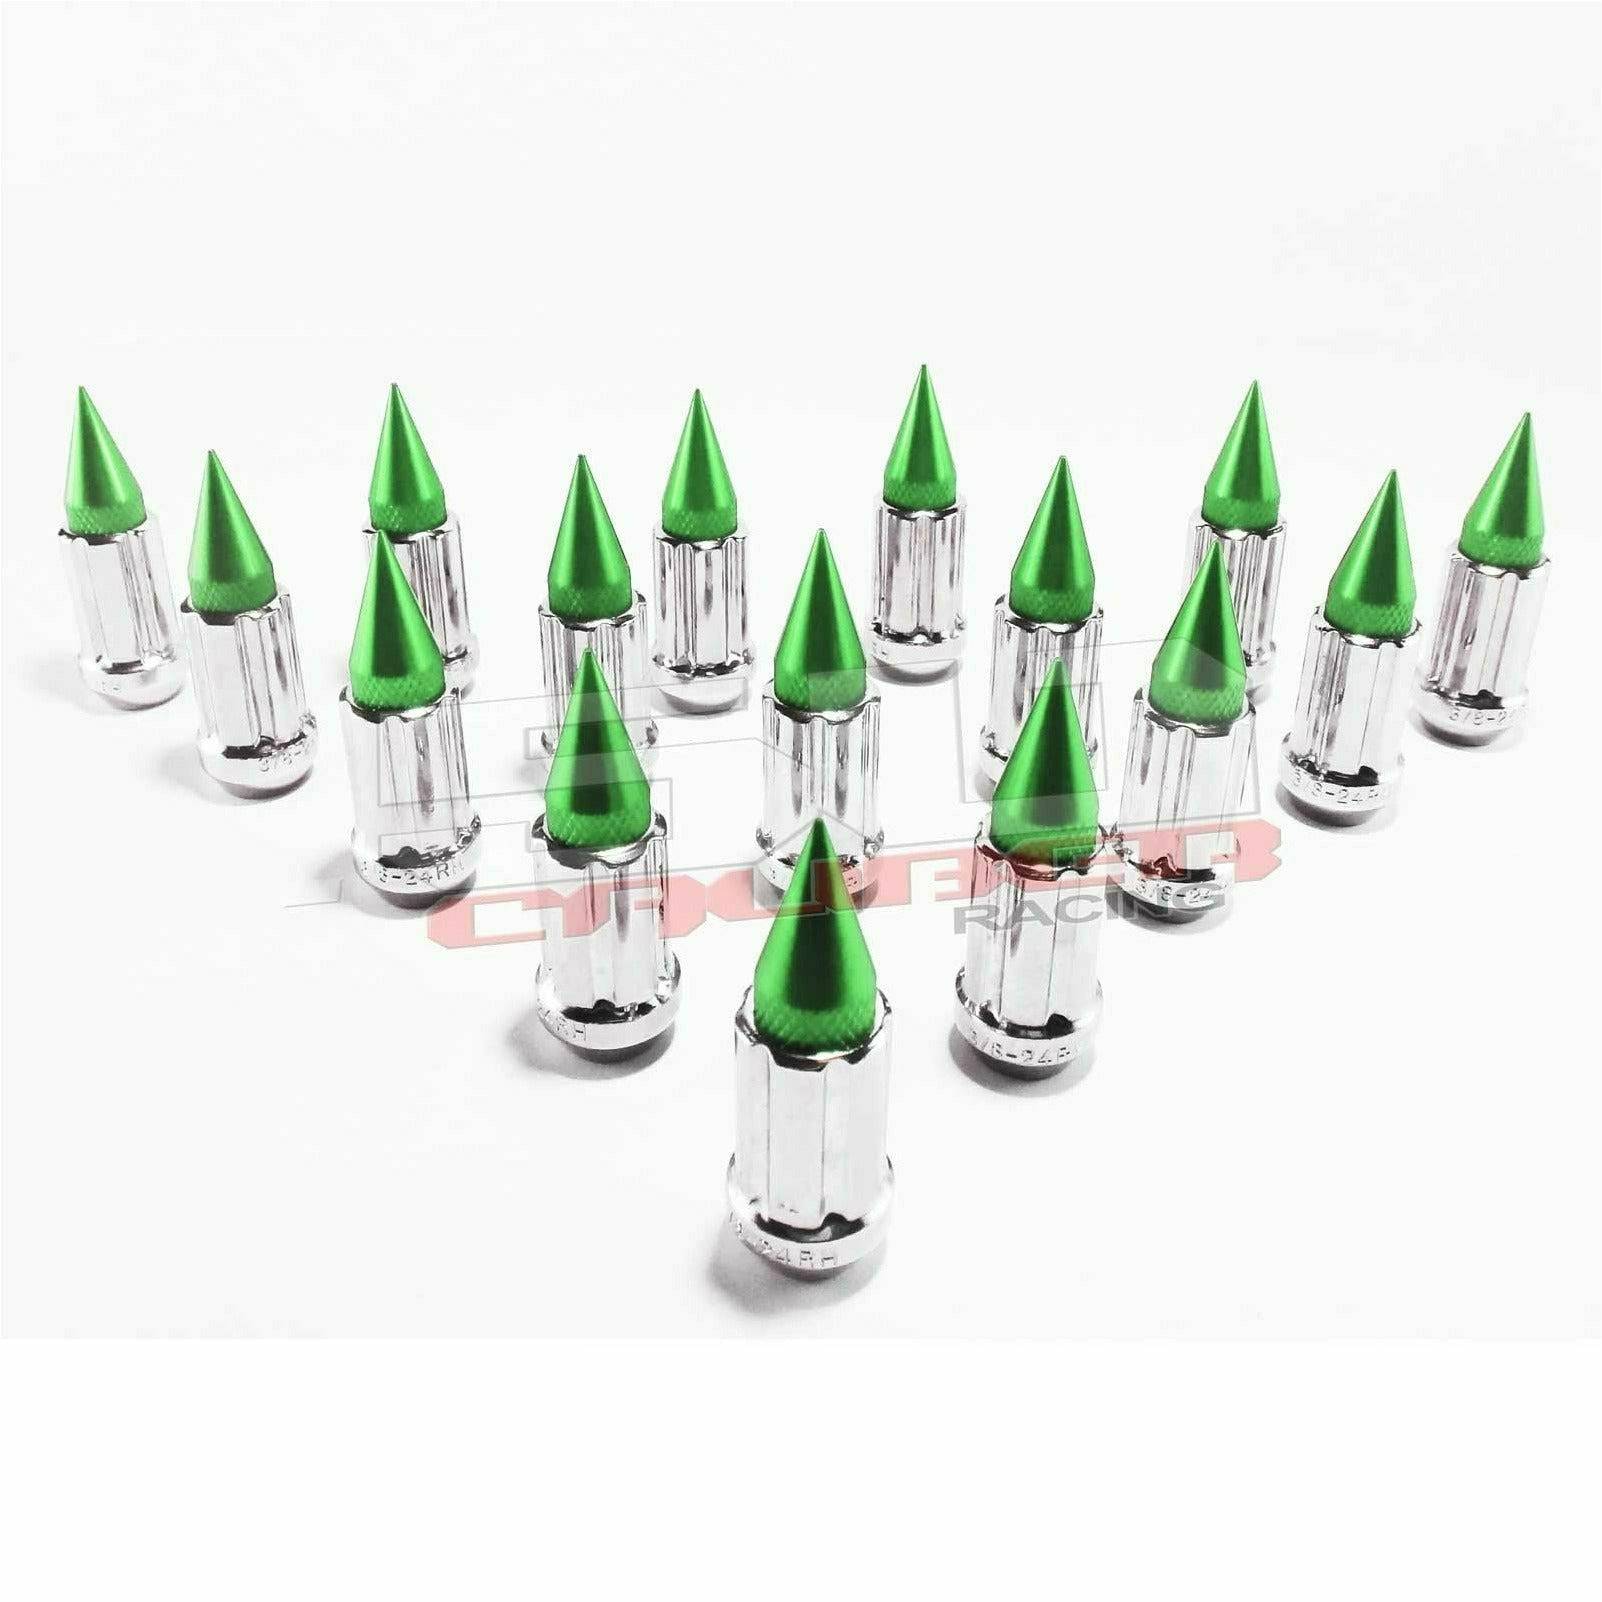 12 x 1.25 mm Spiked Lug Nuts (16 Pack)